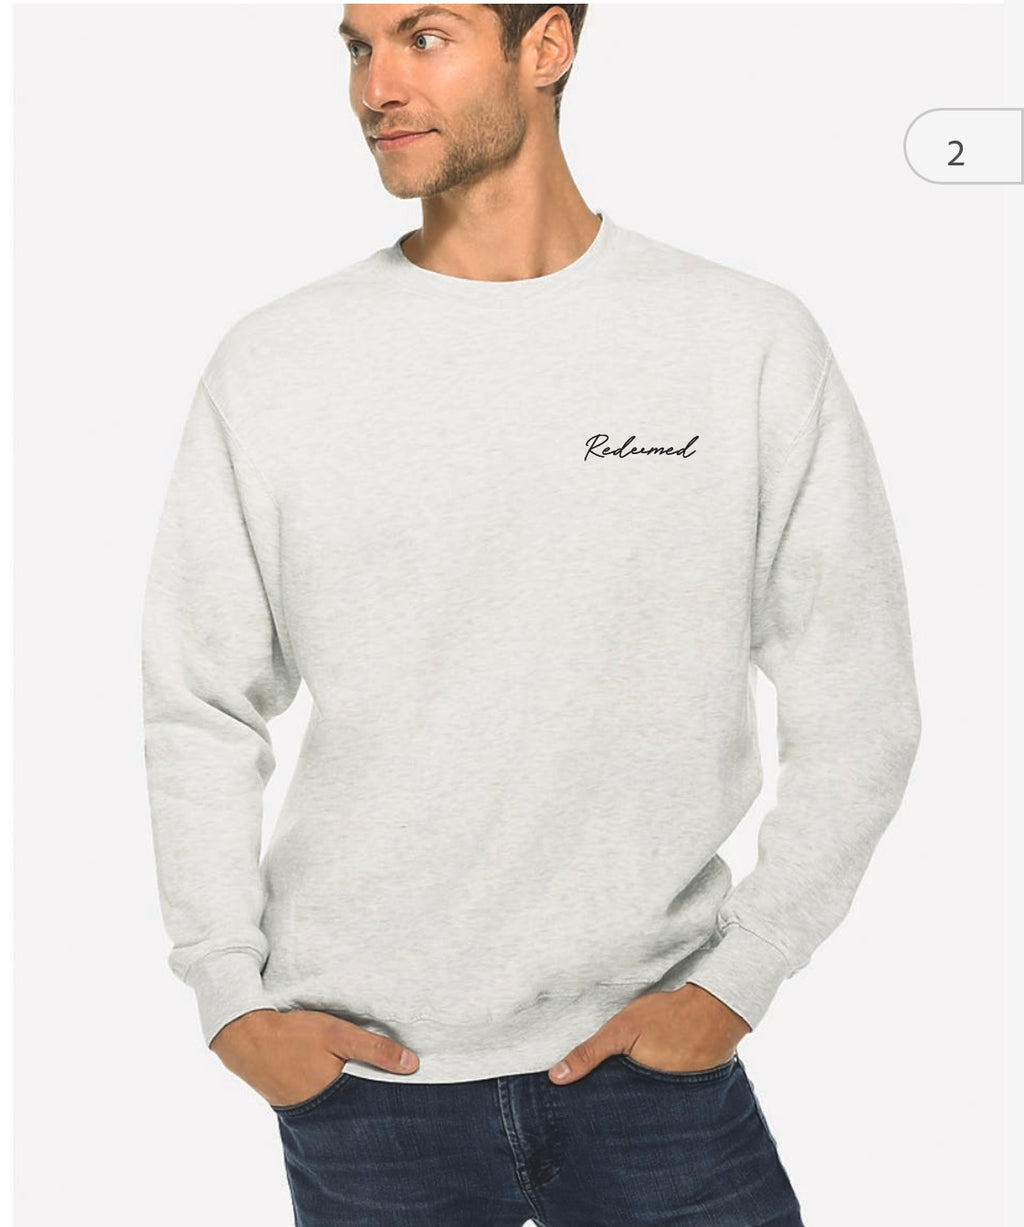 Redeemed-Gray embroidered Crewneck Sweater